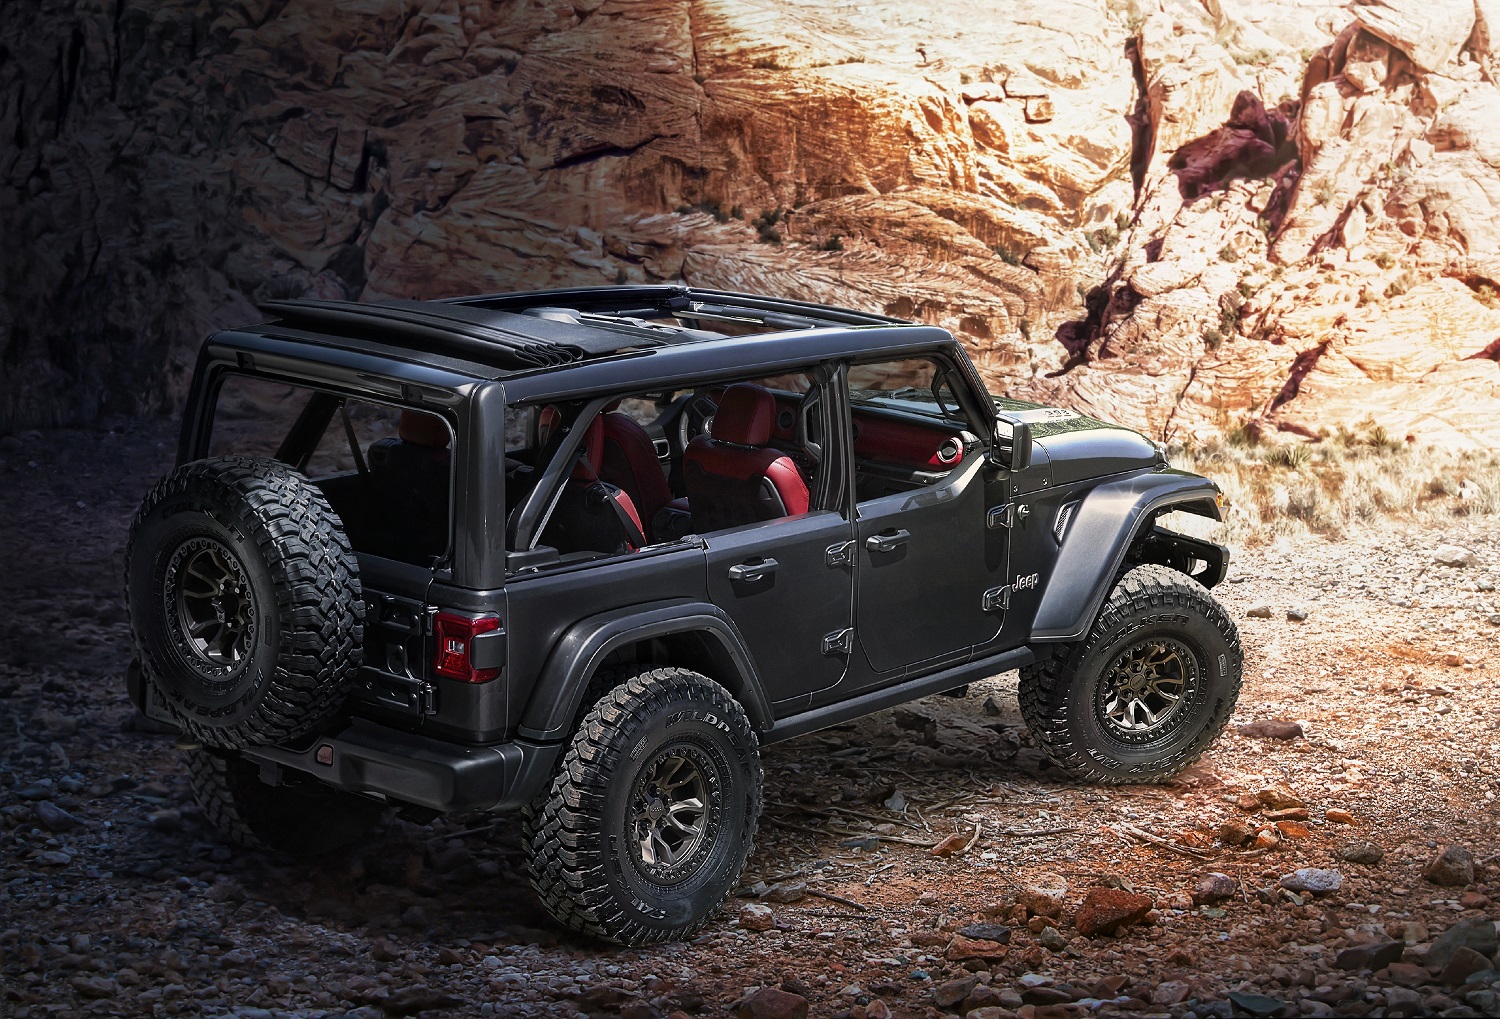 Jeep Wrangler Rubicon 392 Is Coming To Battle 2021 Ford Bronco: Video